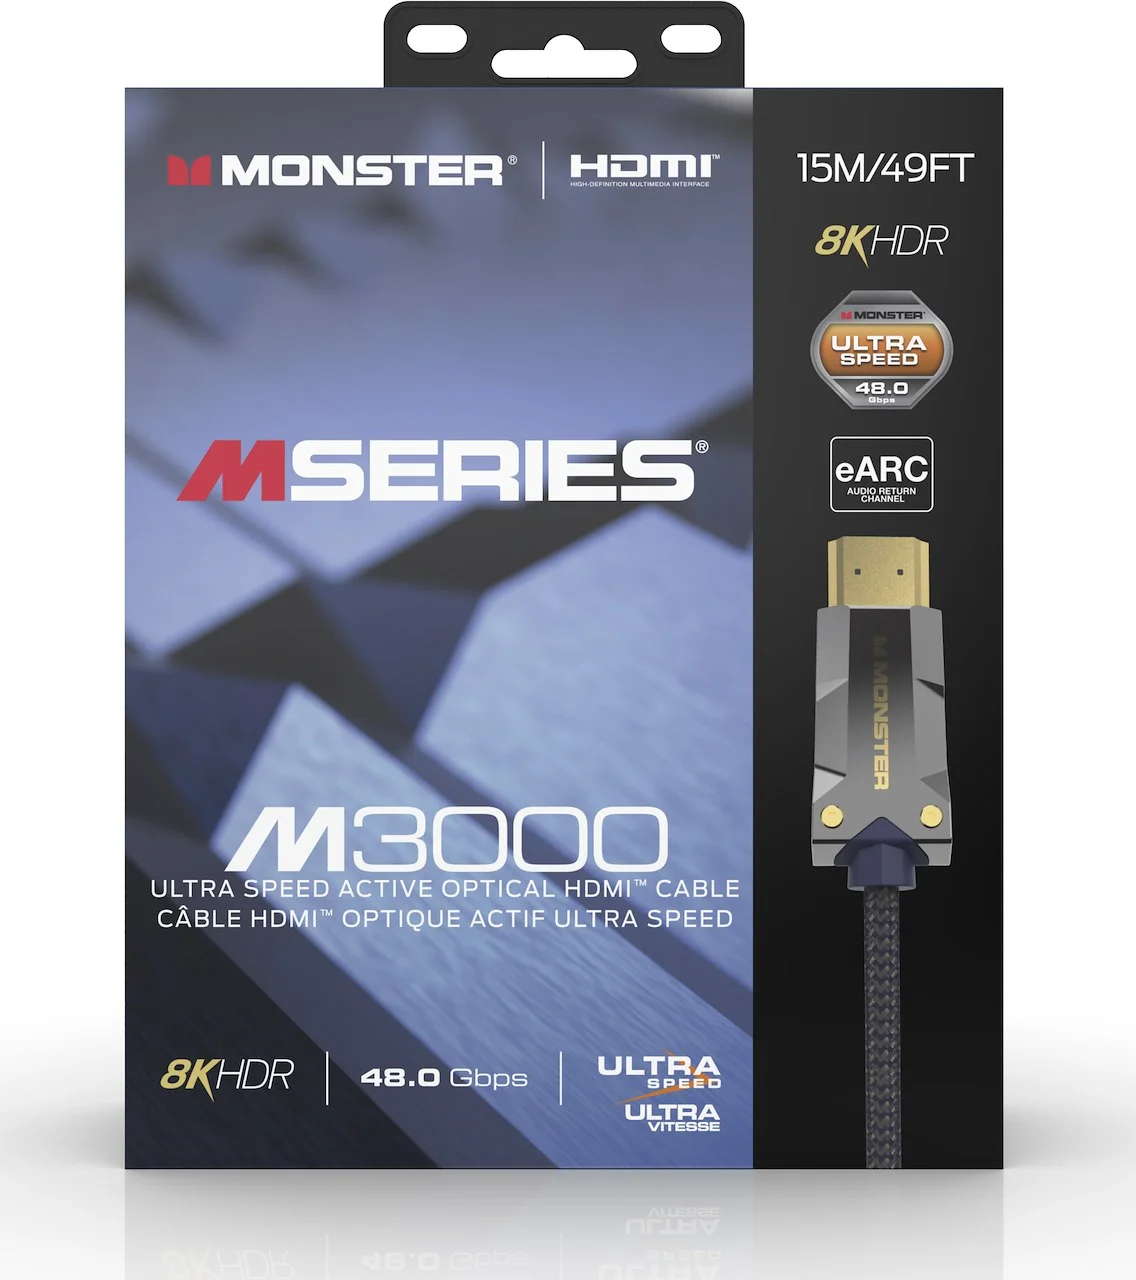 15 Meter High Speed HDMI Cable / 49FT